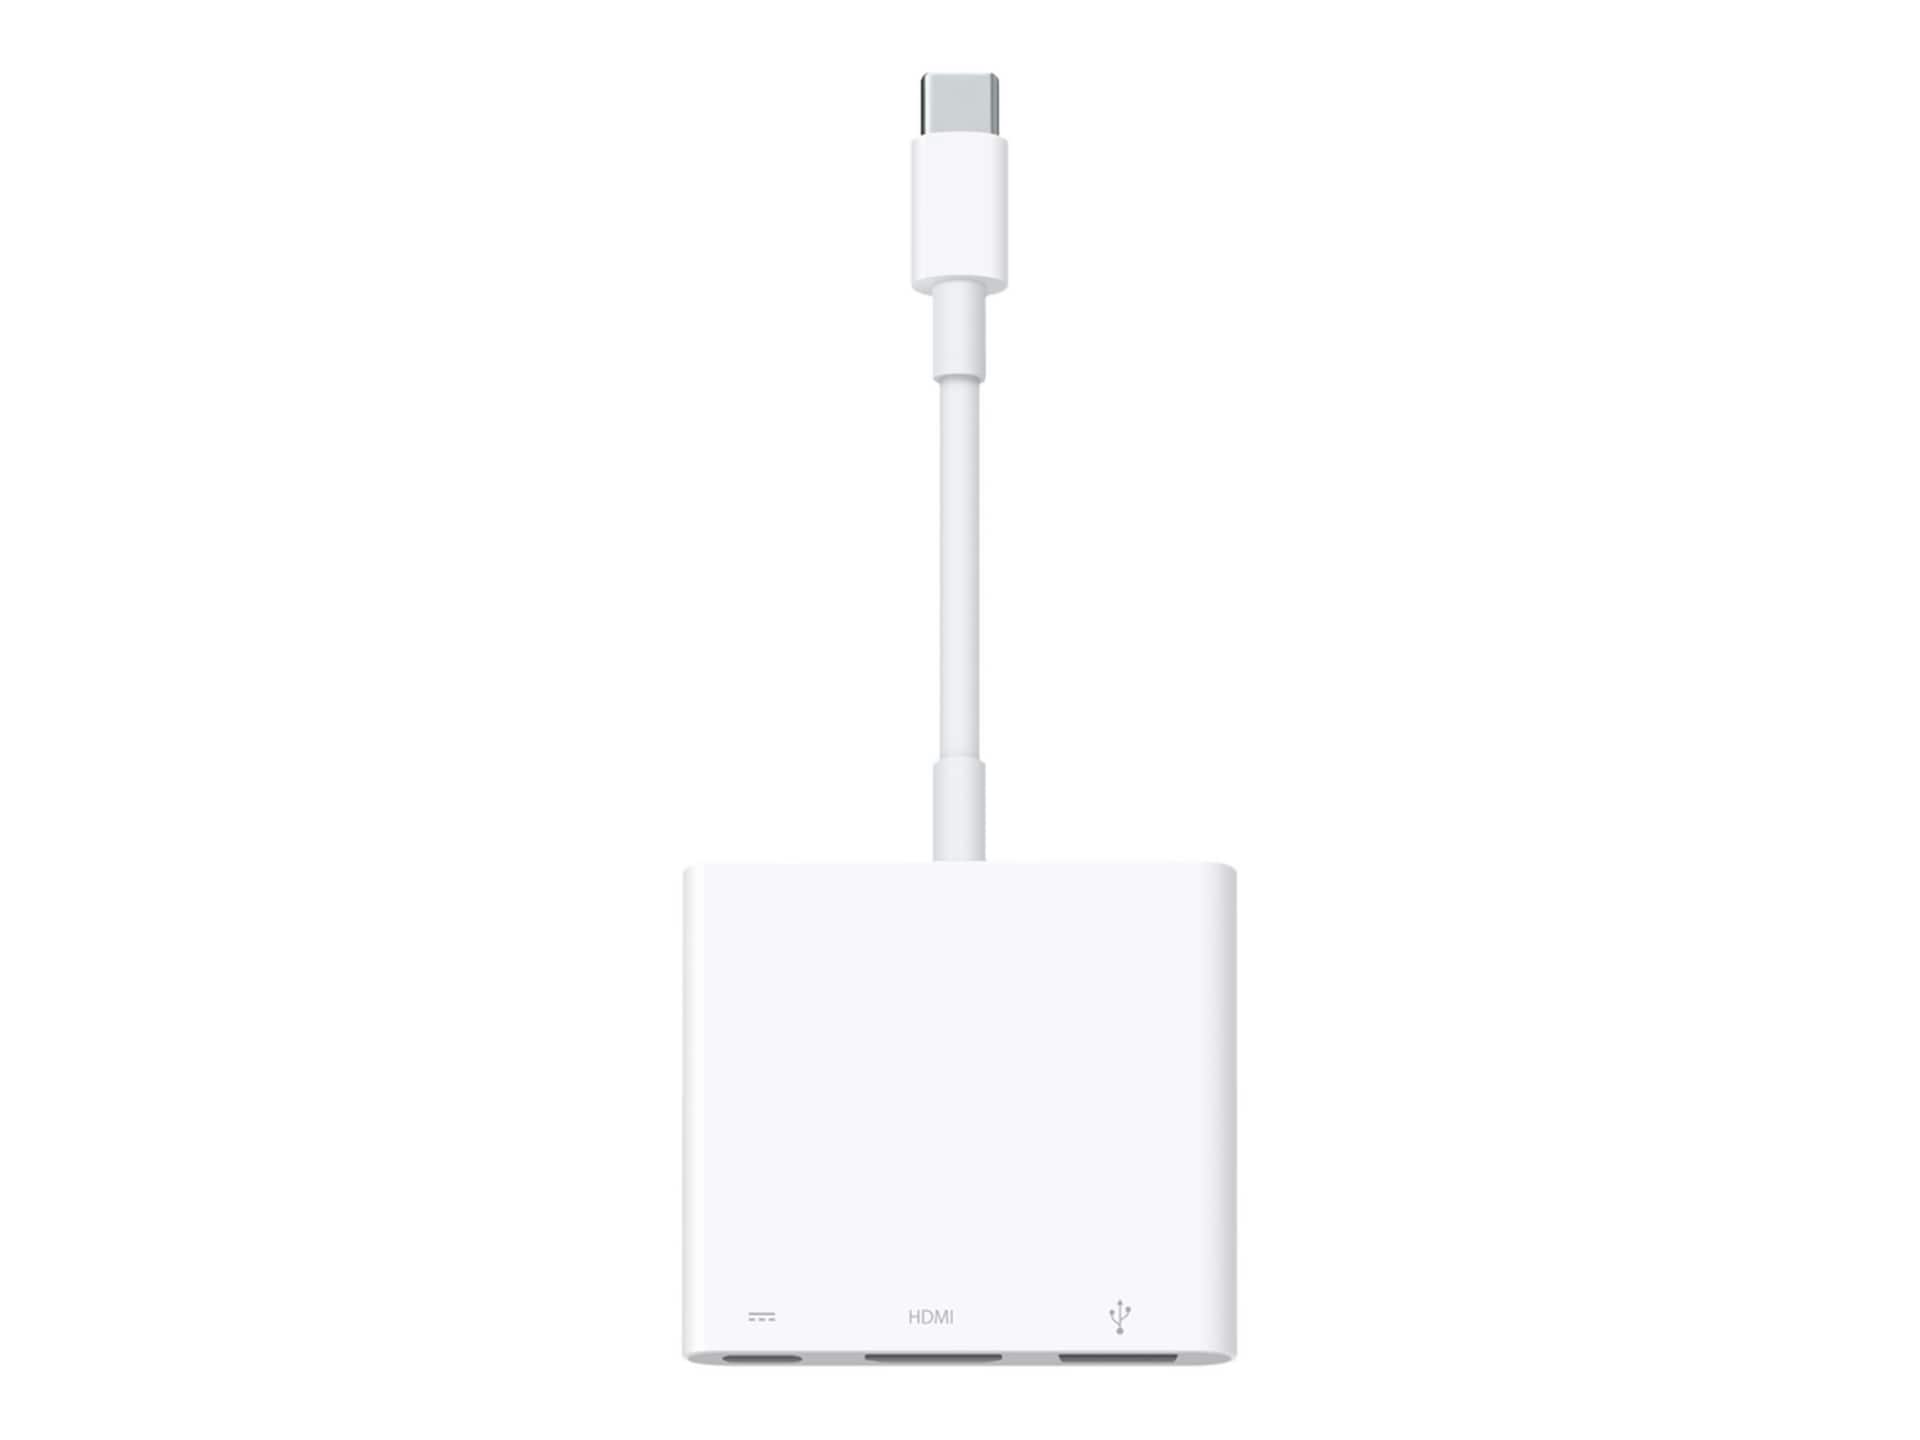 Apple Multiport Adapter - adapter - HDMI / USB - MUF82AM/A - USB Cables - CDW.com